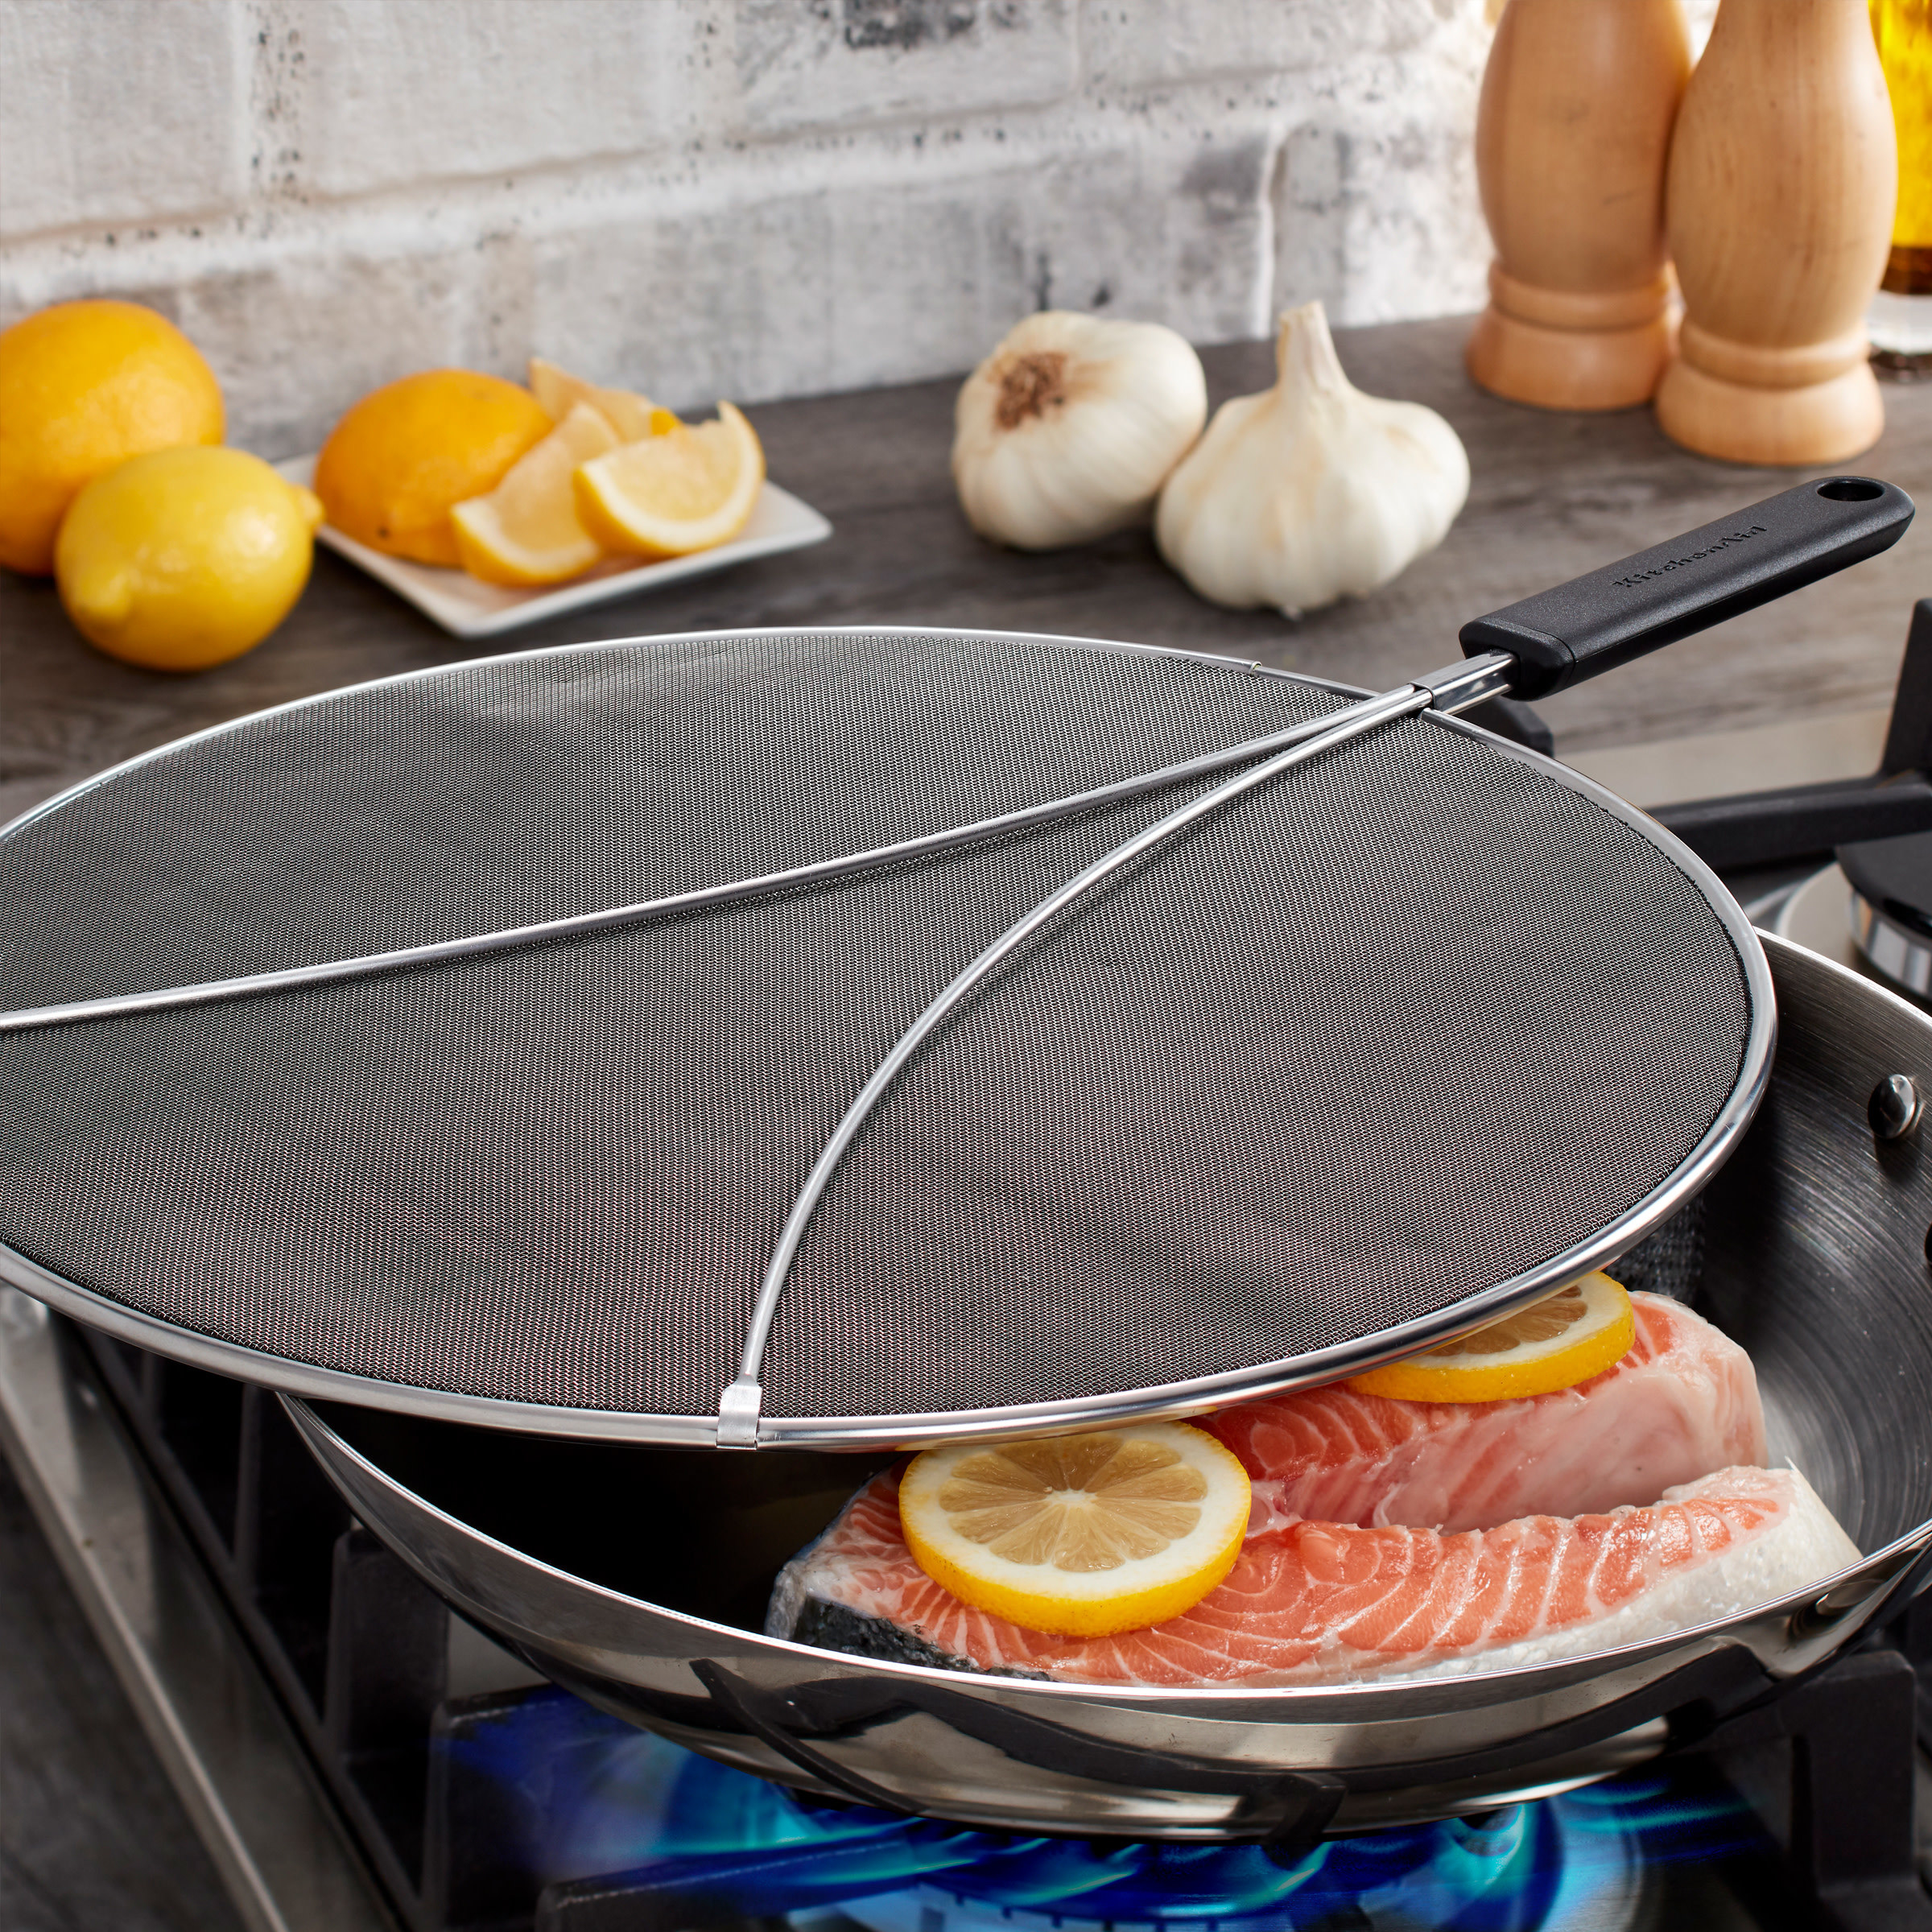 If You Love Cooking But Hate Cleaning Up, You Could Use These 31 Products From Walmart